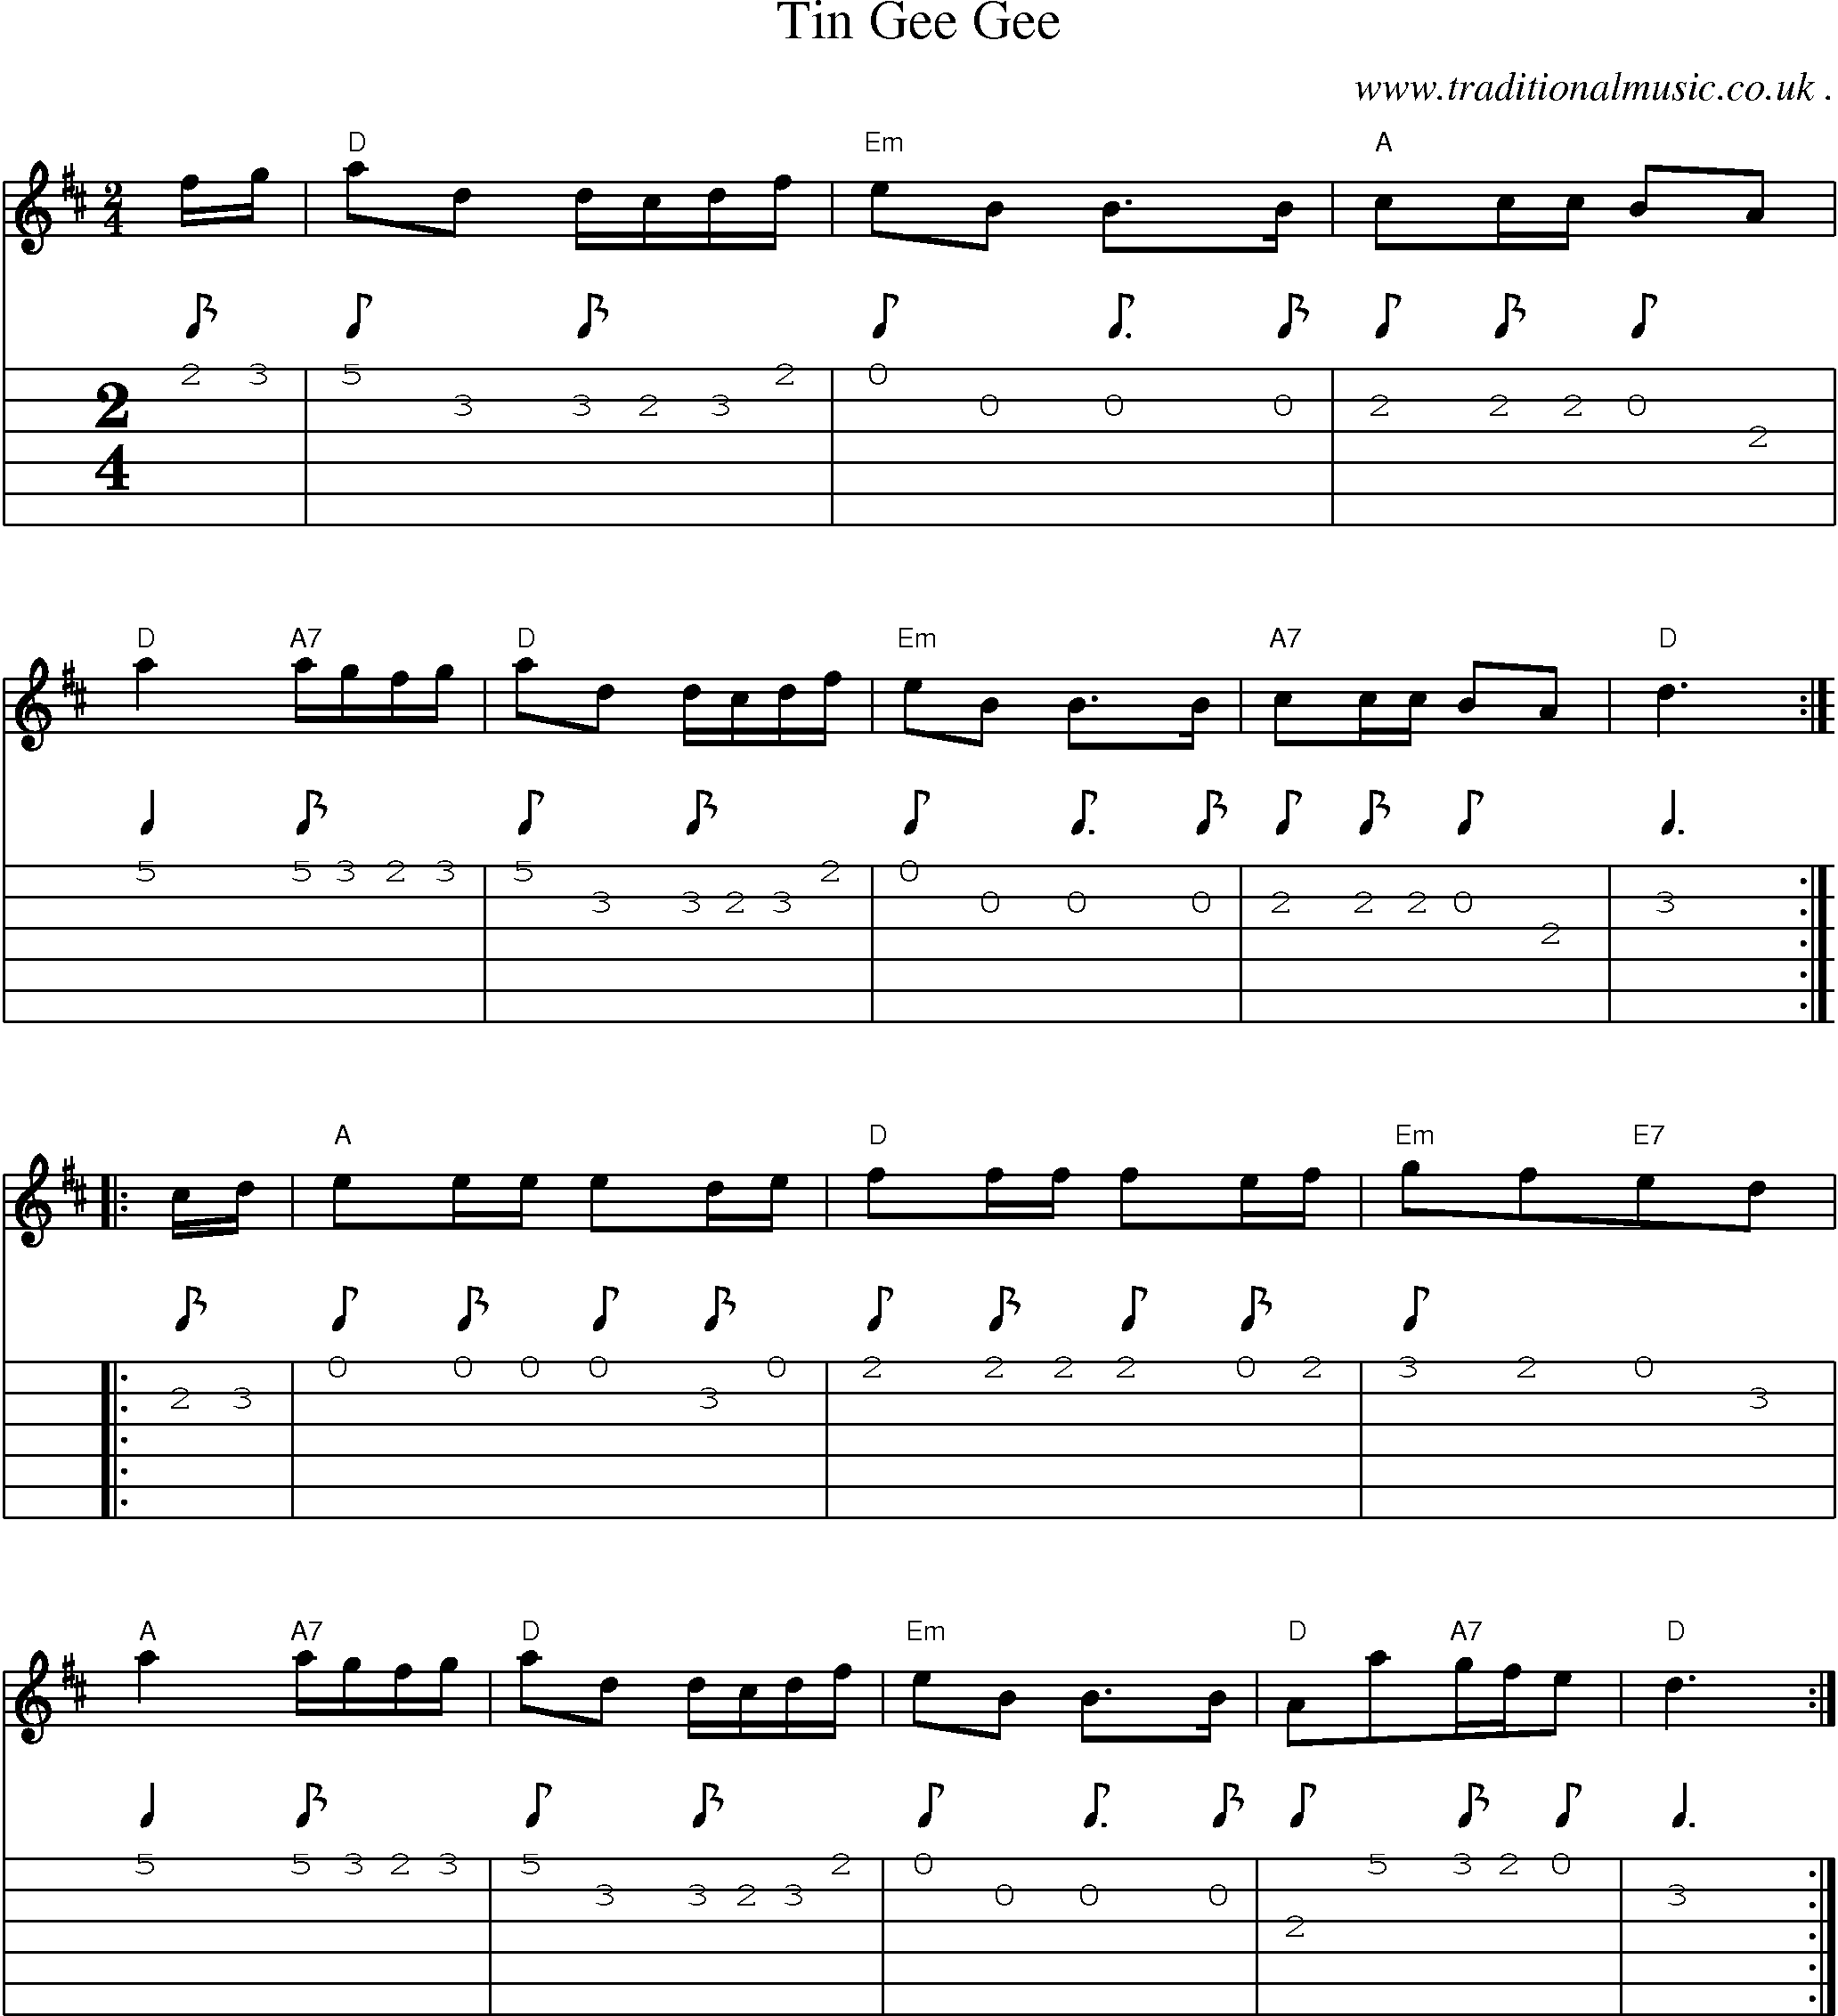 Sheet-Music and Guitar Tabs for Tin Gee Gee